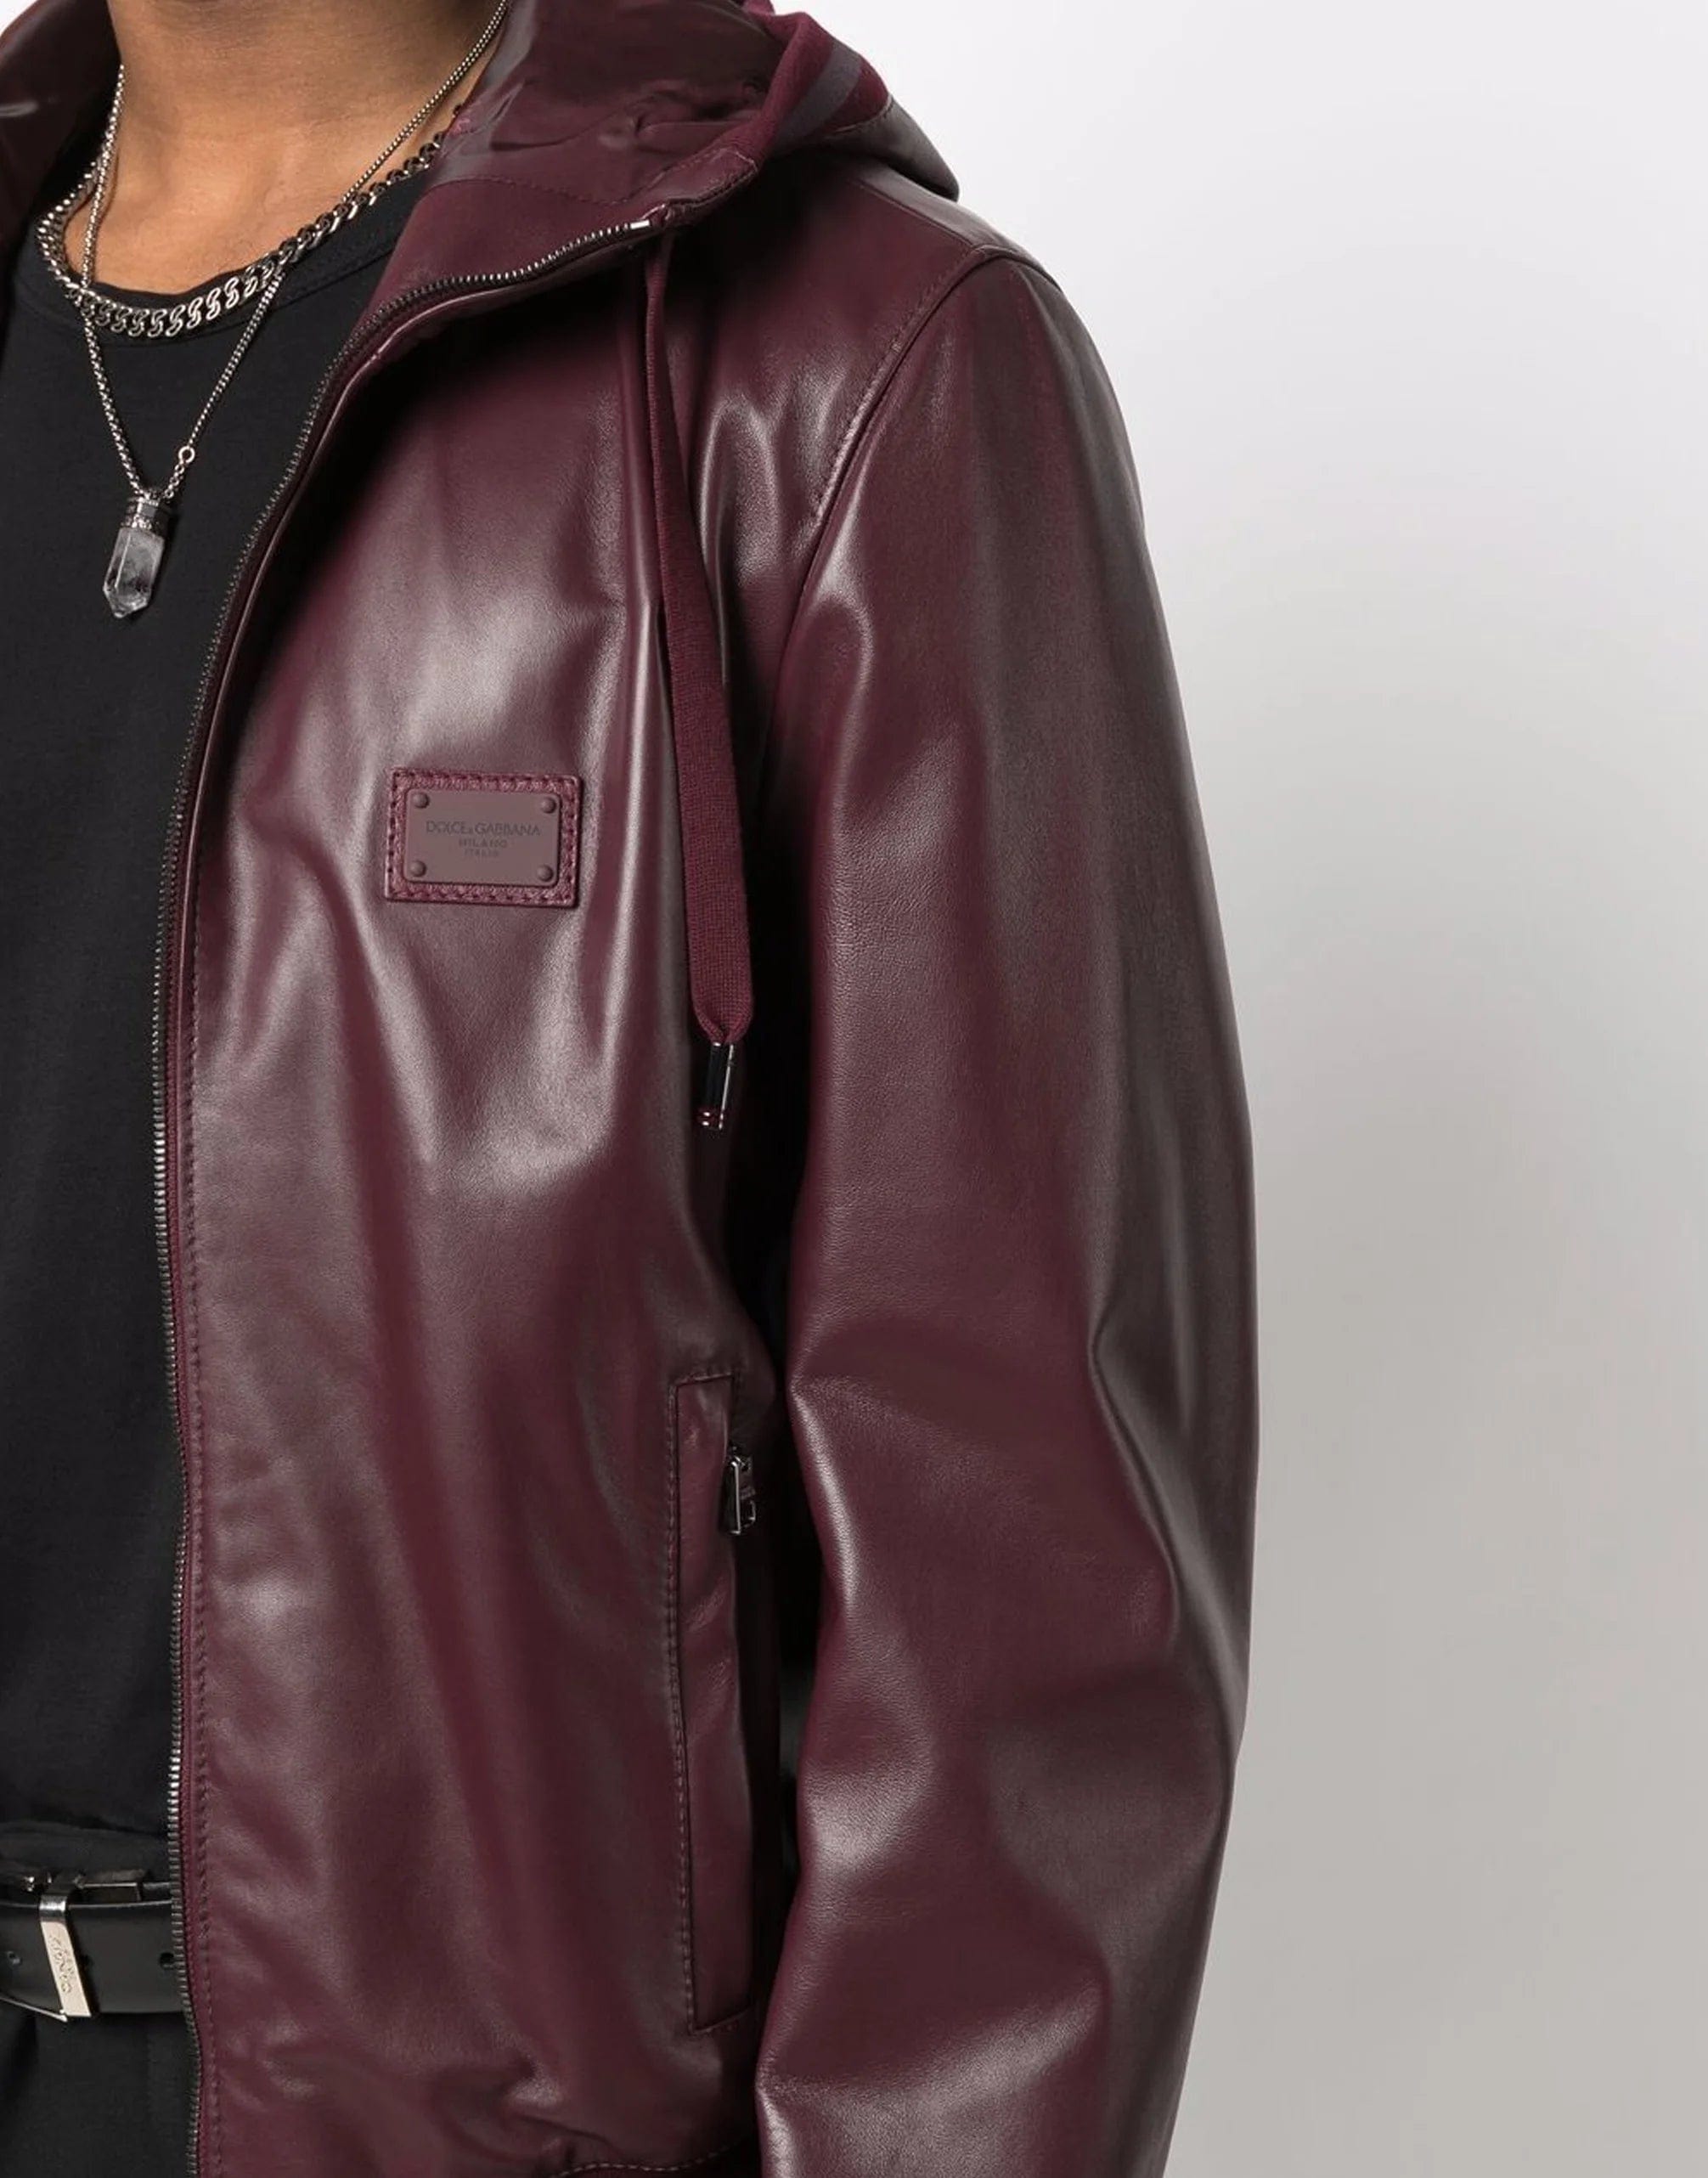 Hooded Jacket With Zip-Fastening